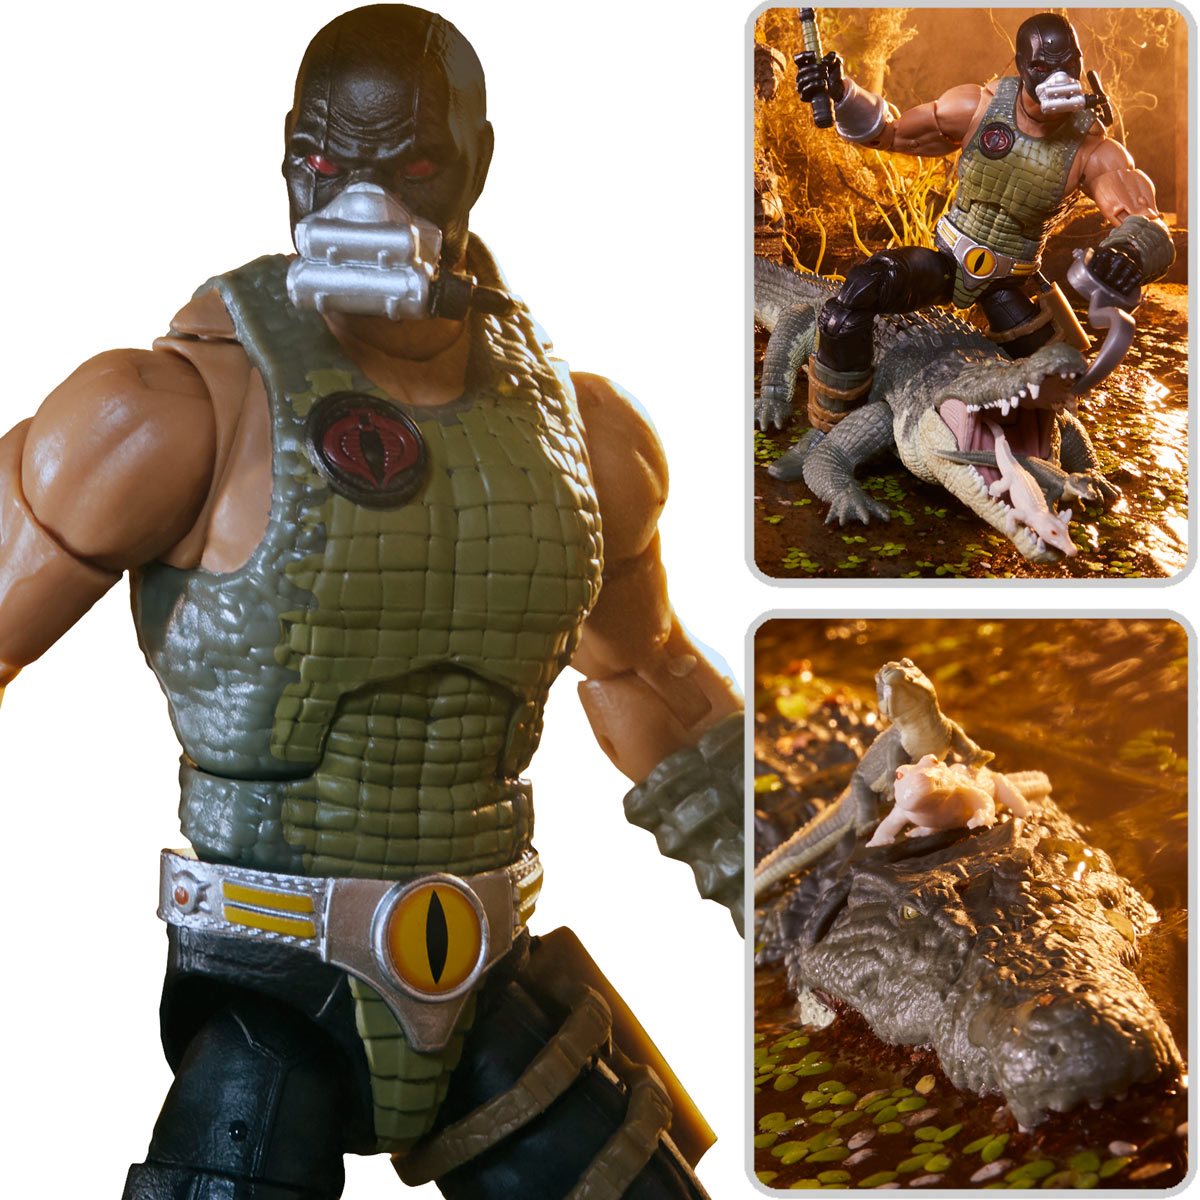 . Joe Classified Series Croc Master and Alligator 6-Inch Action Figures